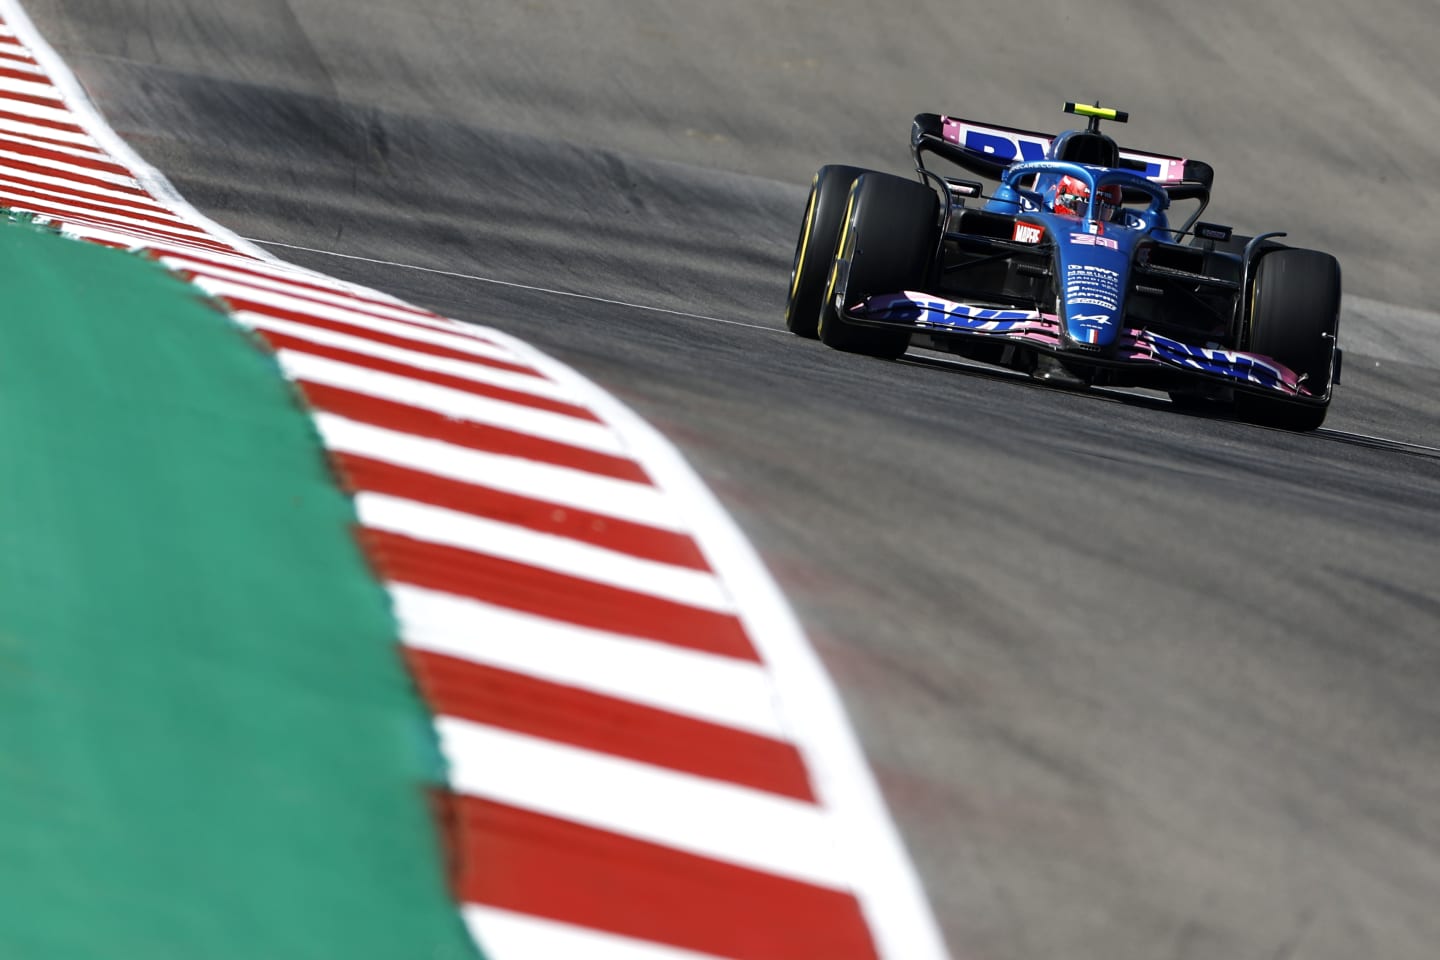 AUSTIN, TEXAS - OCTOBER 21: Esteban Ocon of France driving the (31) Alpine F1 A522 Renault on track during practice ahead of the F1 Grand Prix of USA at Circuit of The Americas on October 21, 2022 in Austin, Texas. (Photo by Chris Graythen/Getty Images)